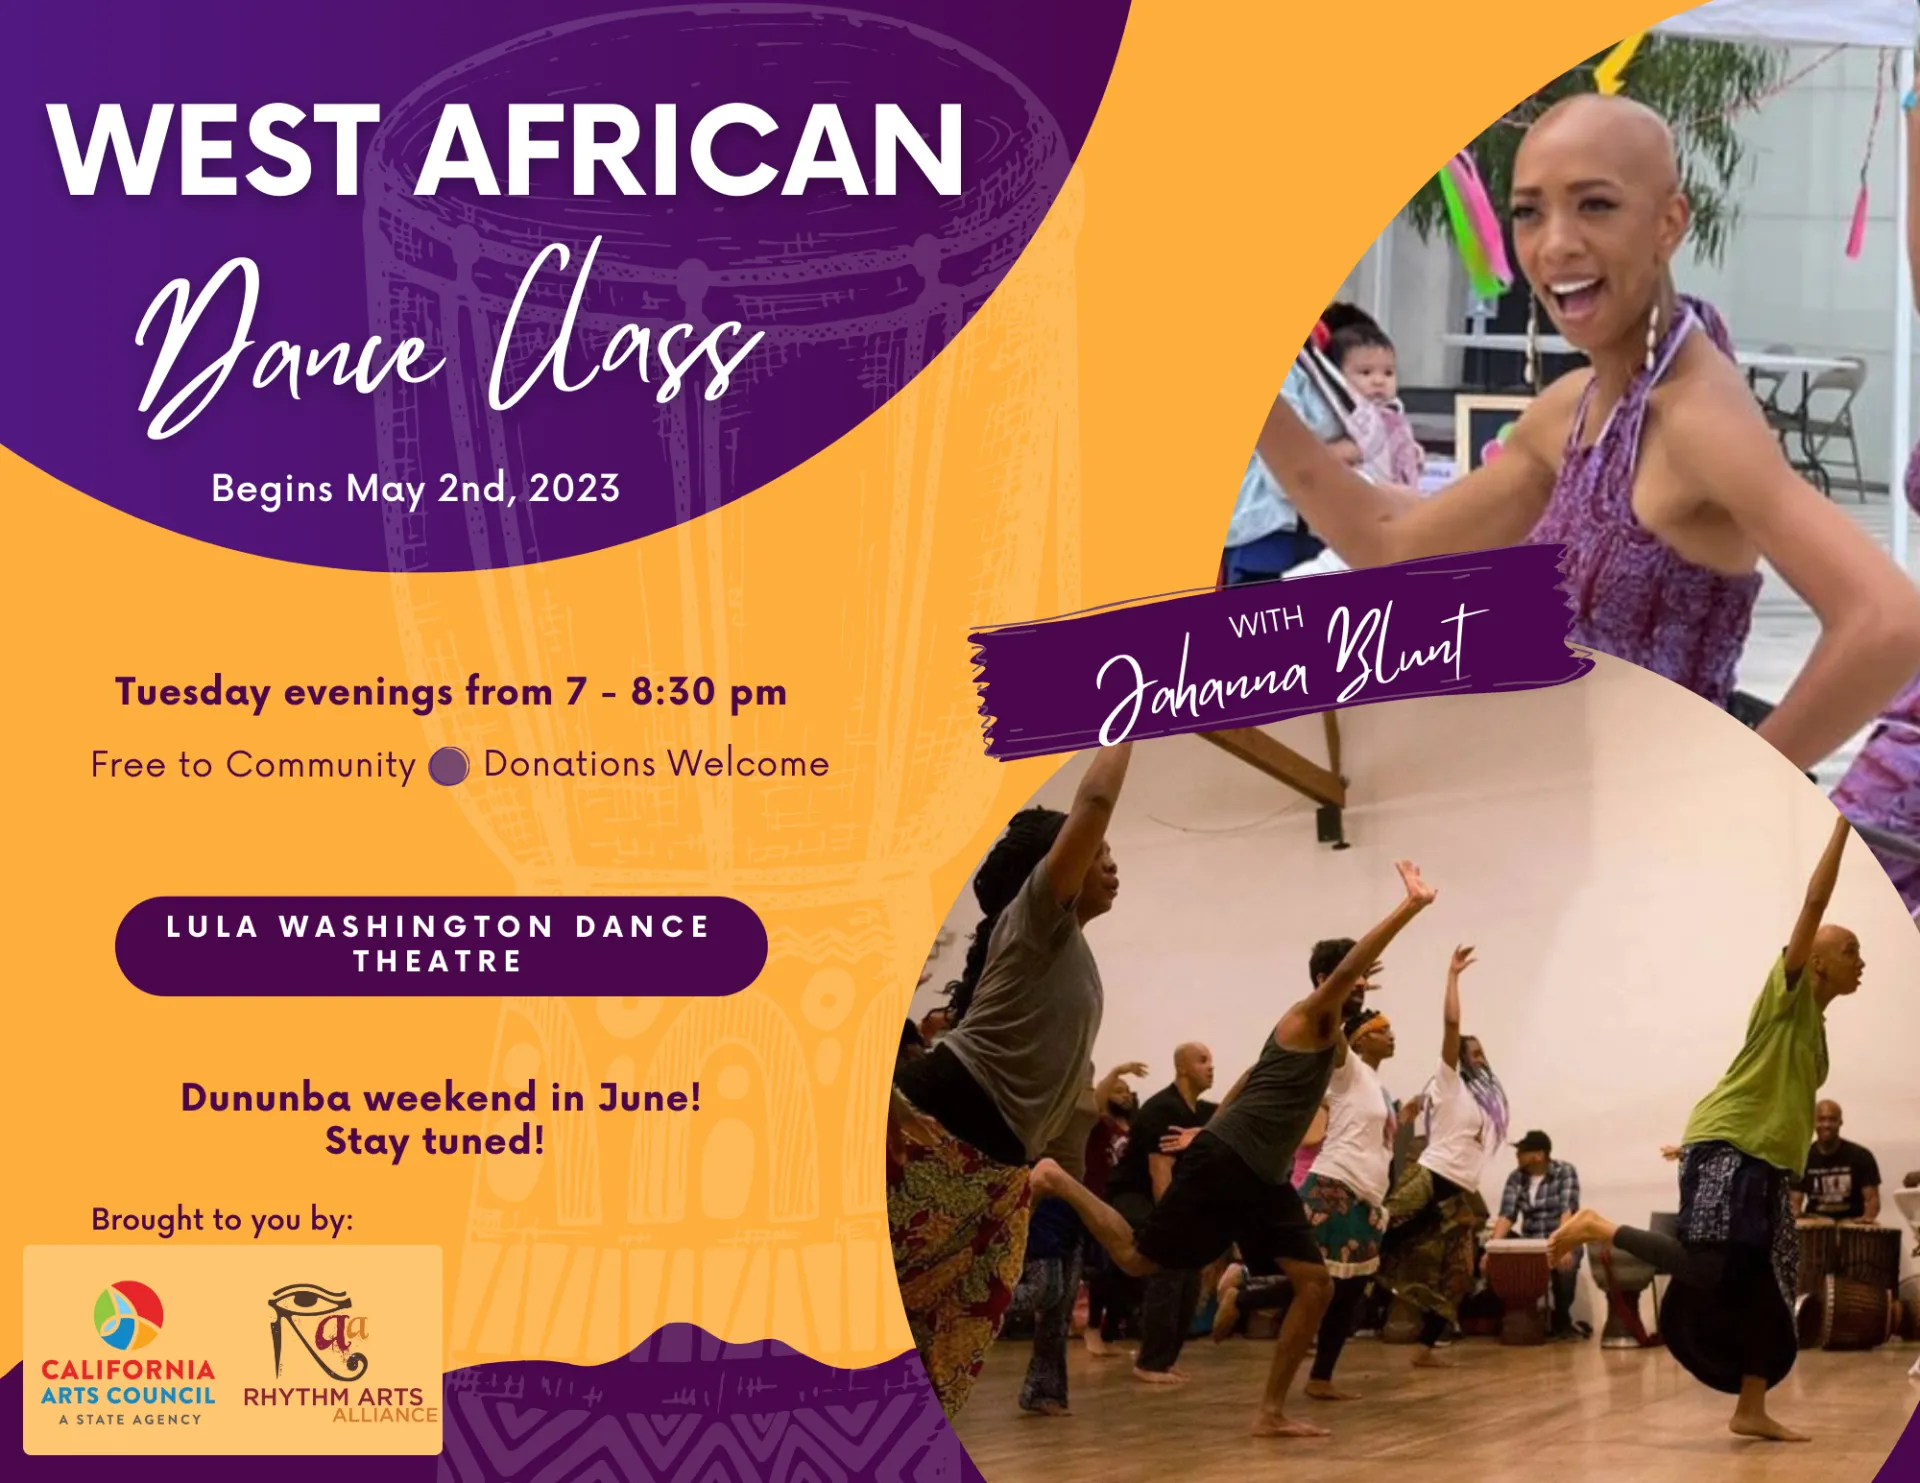 Flyer for Community Dance Class features a picture of Jahanna Blunt and a picture of Jahanna dancing with students in a dance studio.